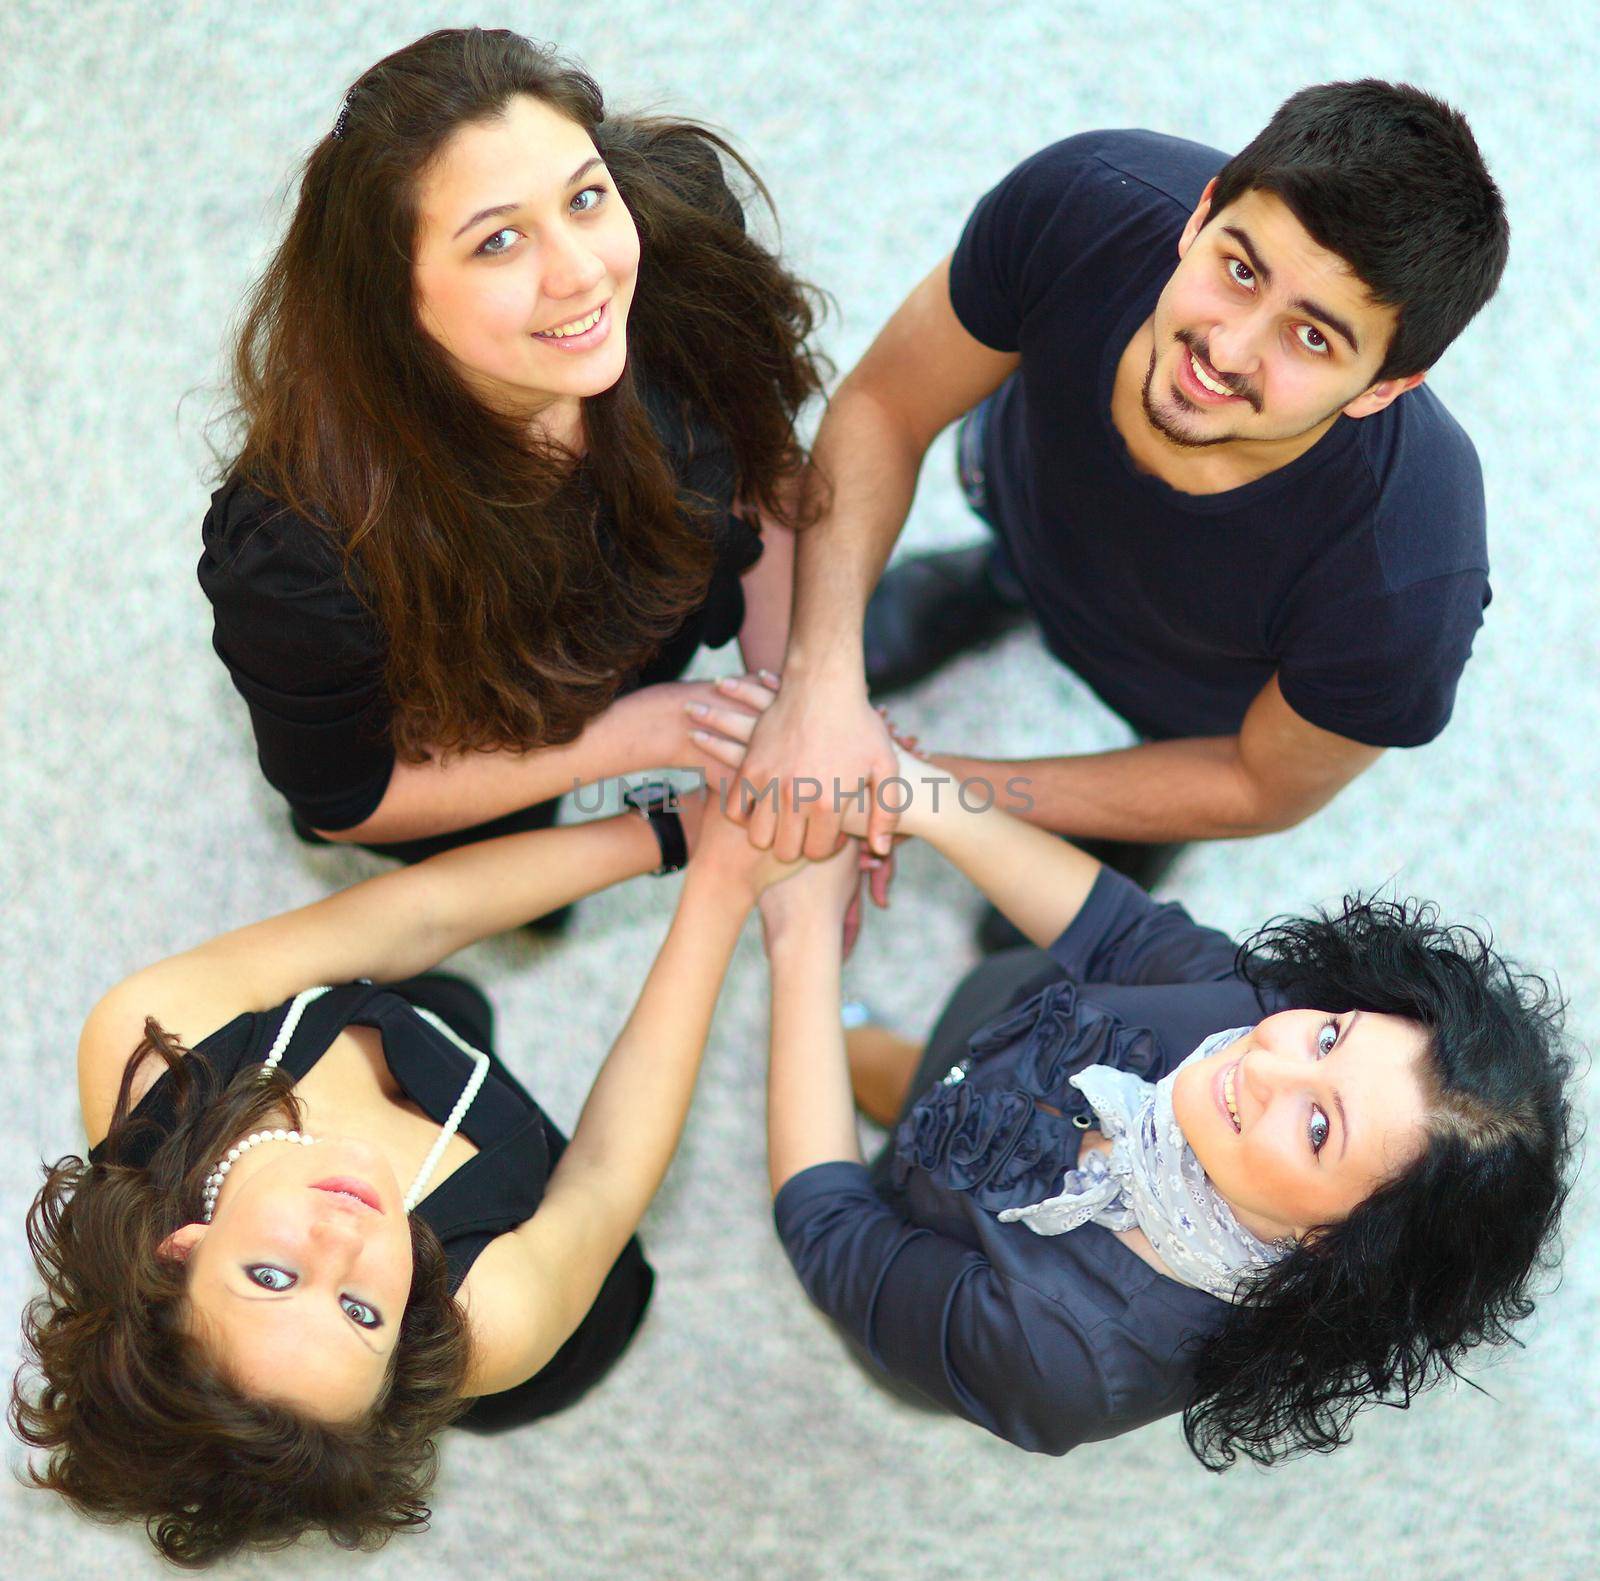 Group of people with hands together showing teamwork